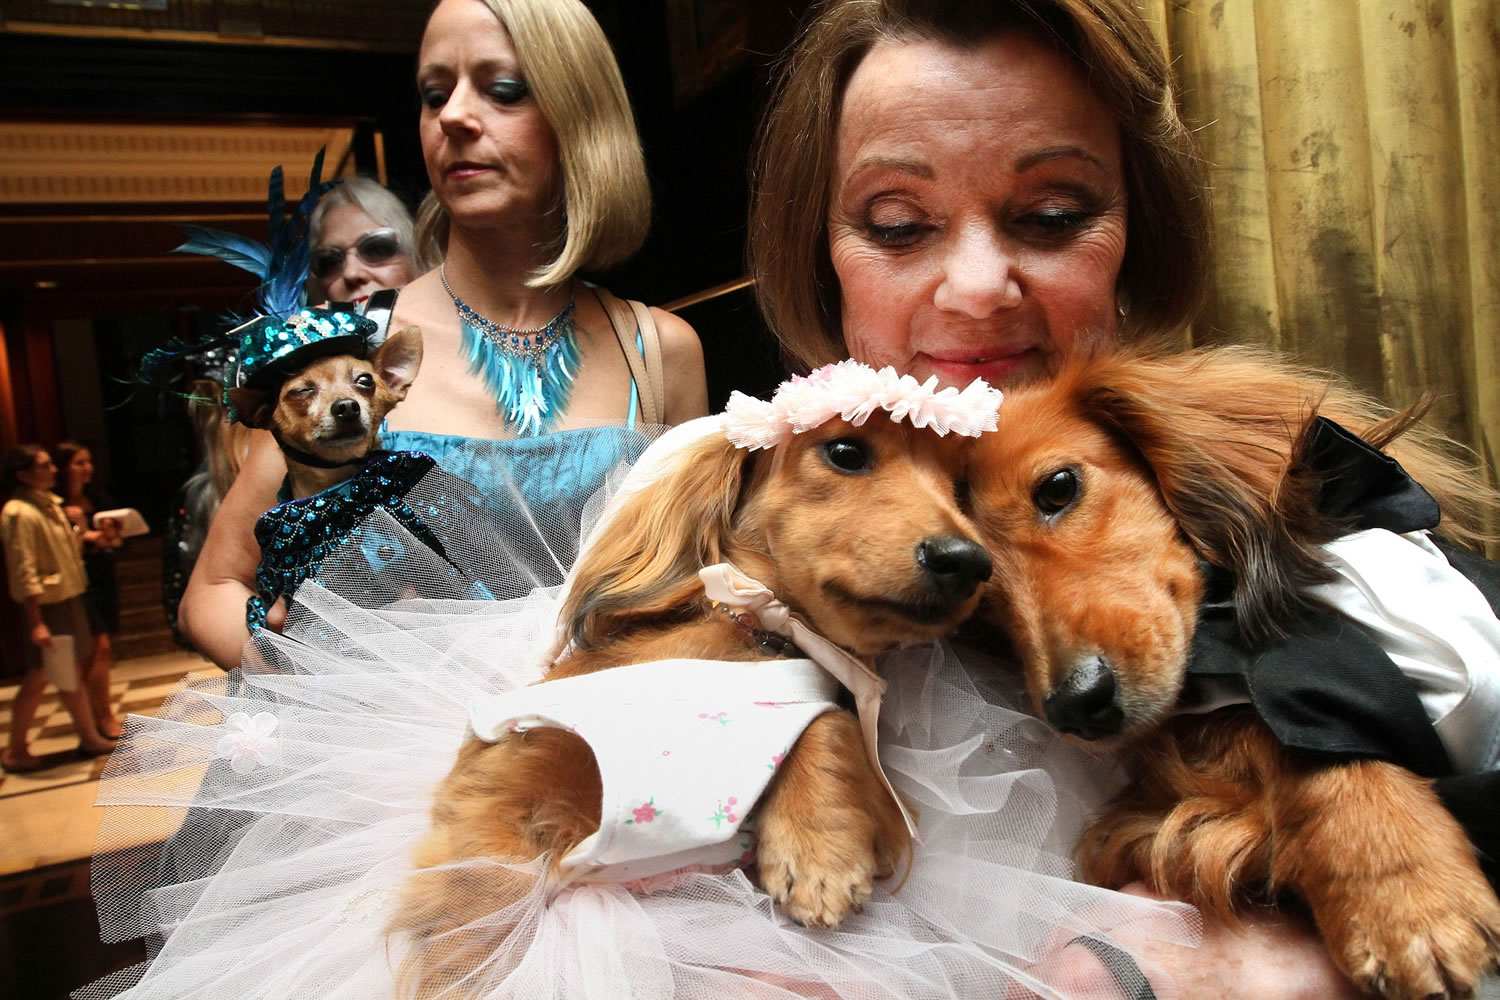 Dachshunds Dee Dee, foreground left, and Clifford are held by their owner, Valerie Diker, as they await the start of a wedding for pets in New York in 2012.